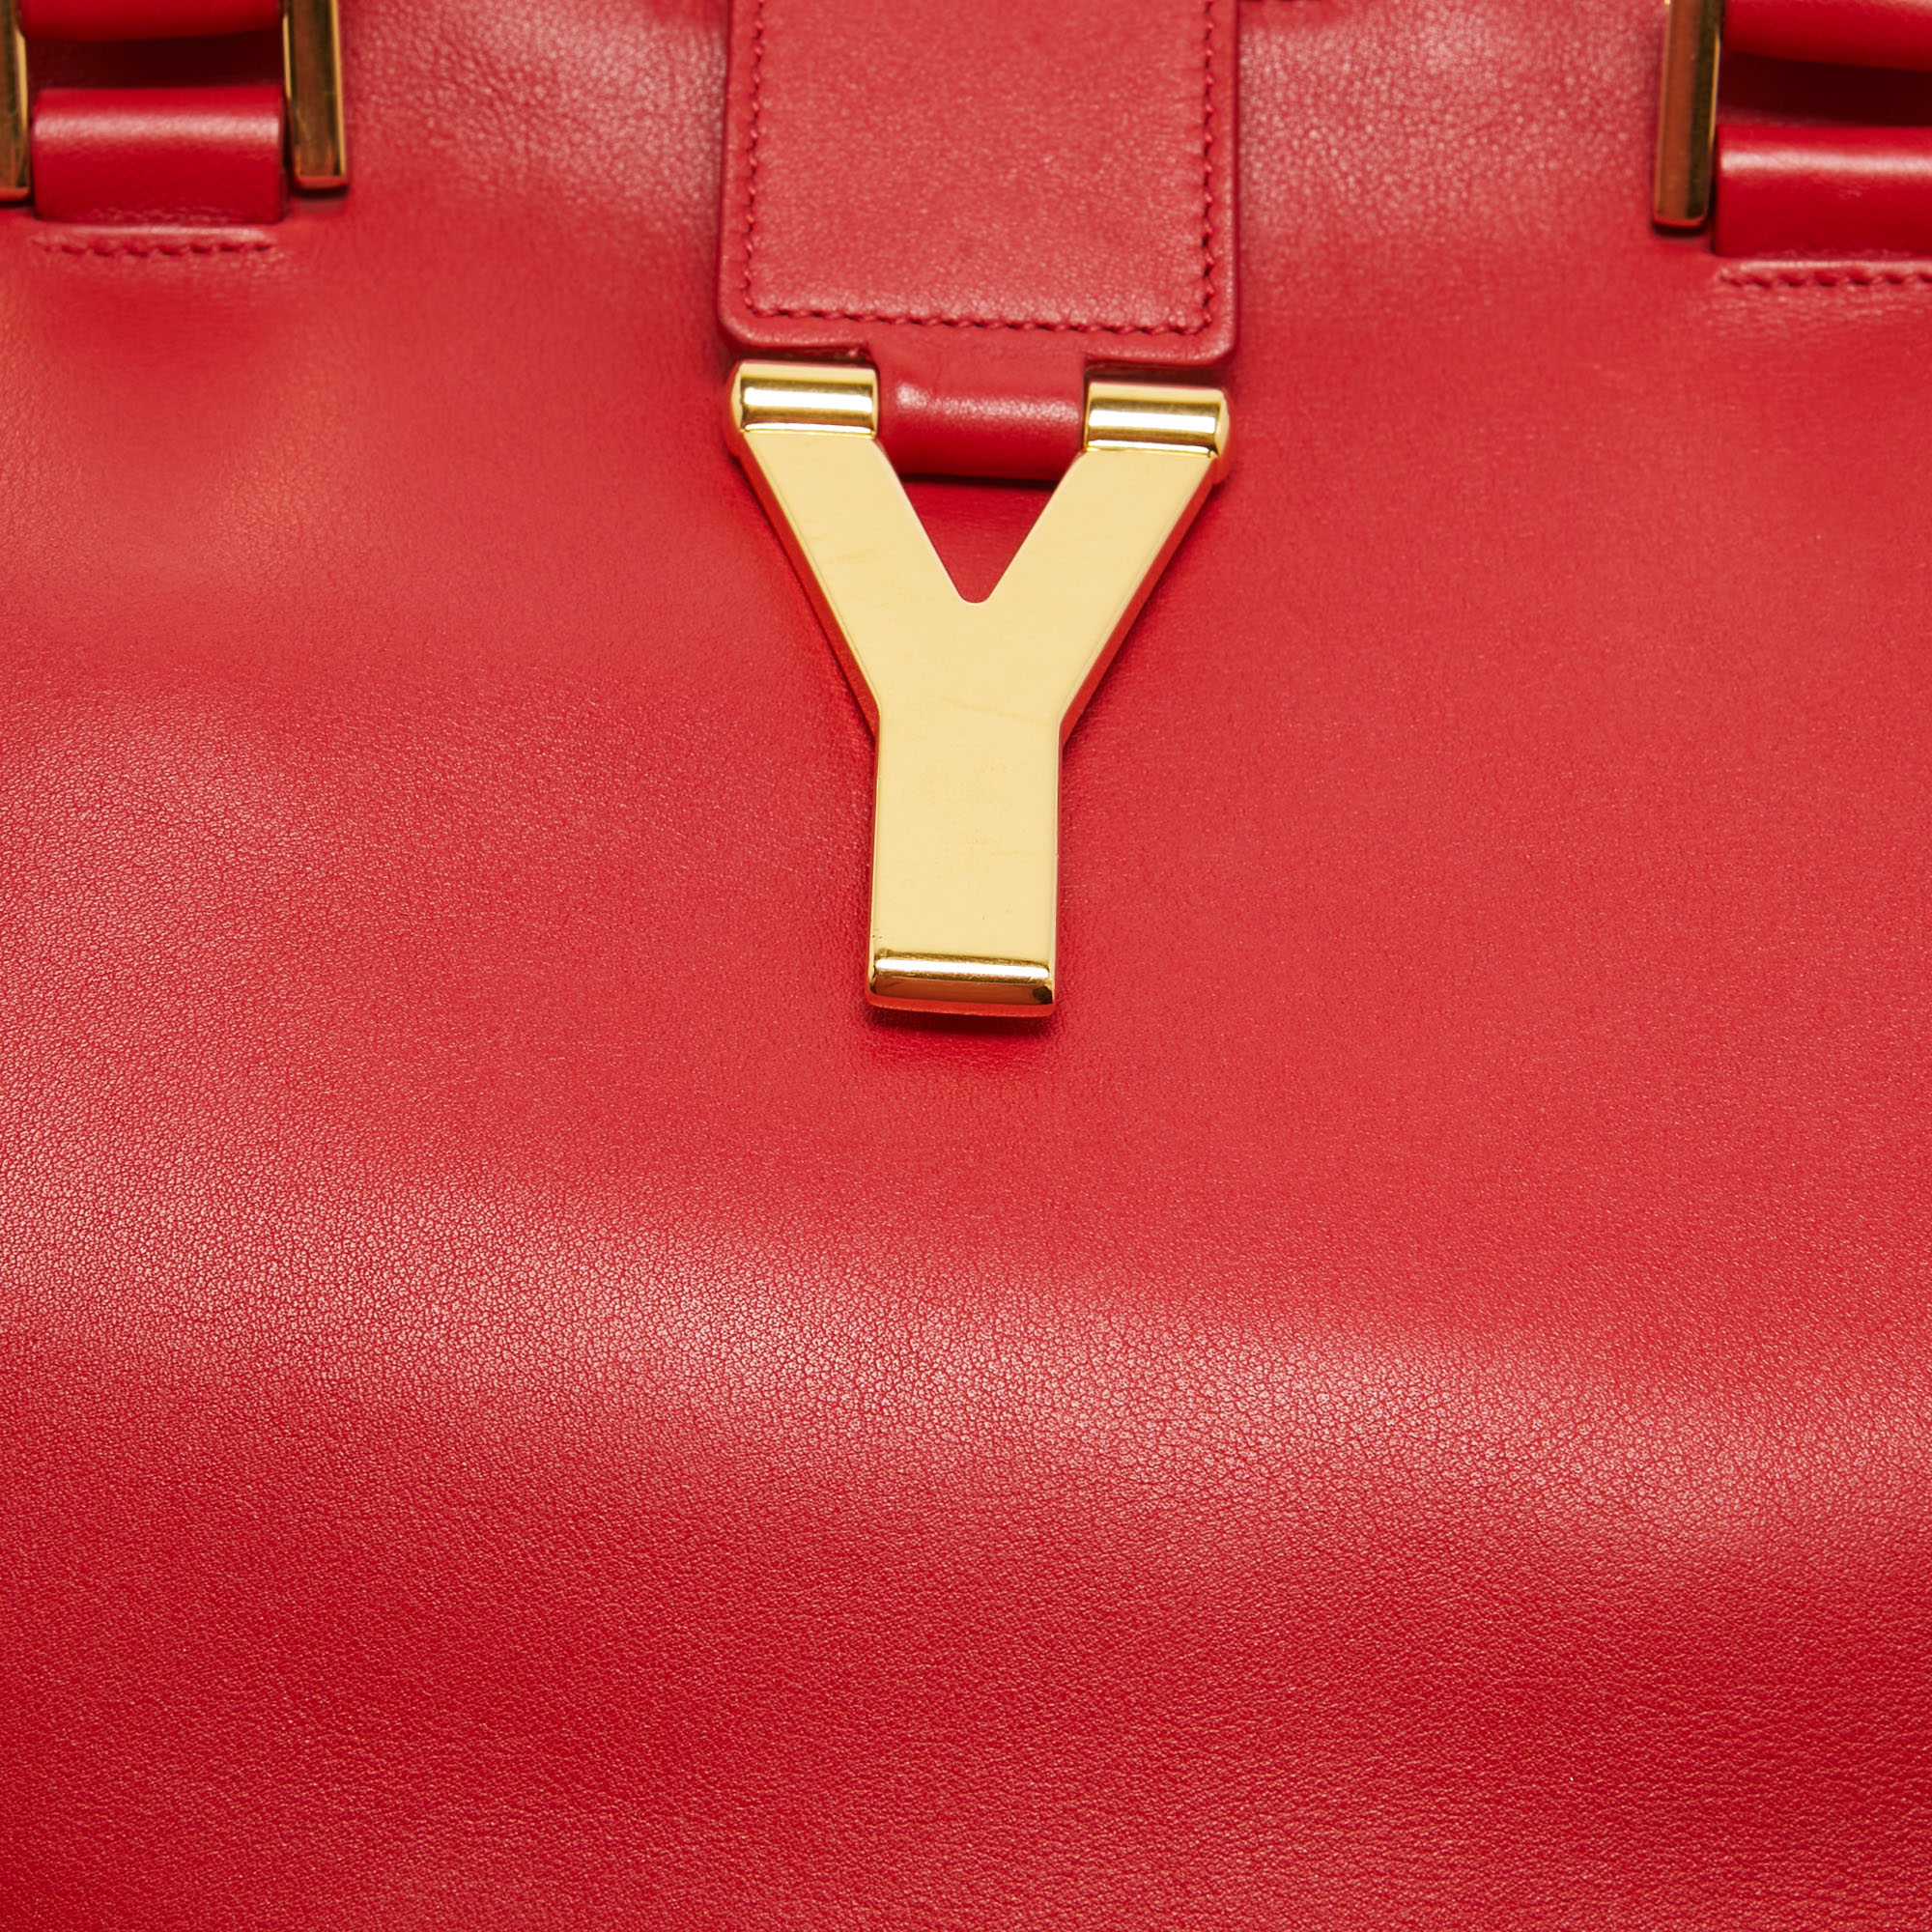 Saint Laurent Red Leather Medium Cabas Chyc Tote